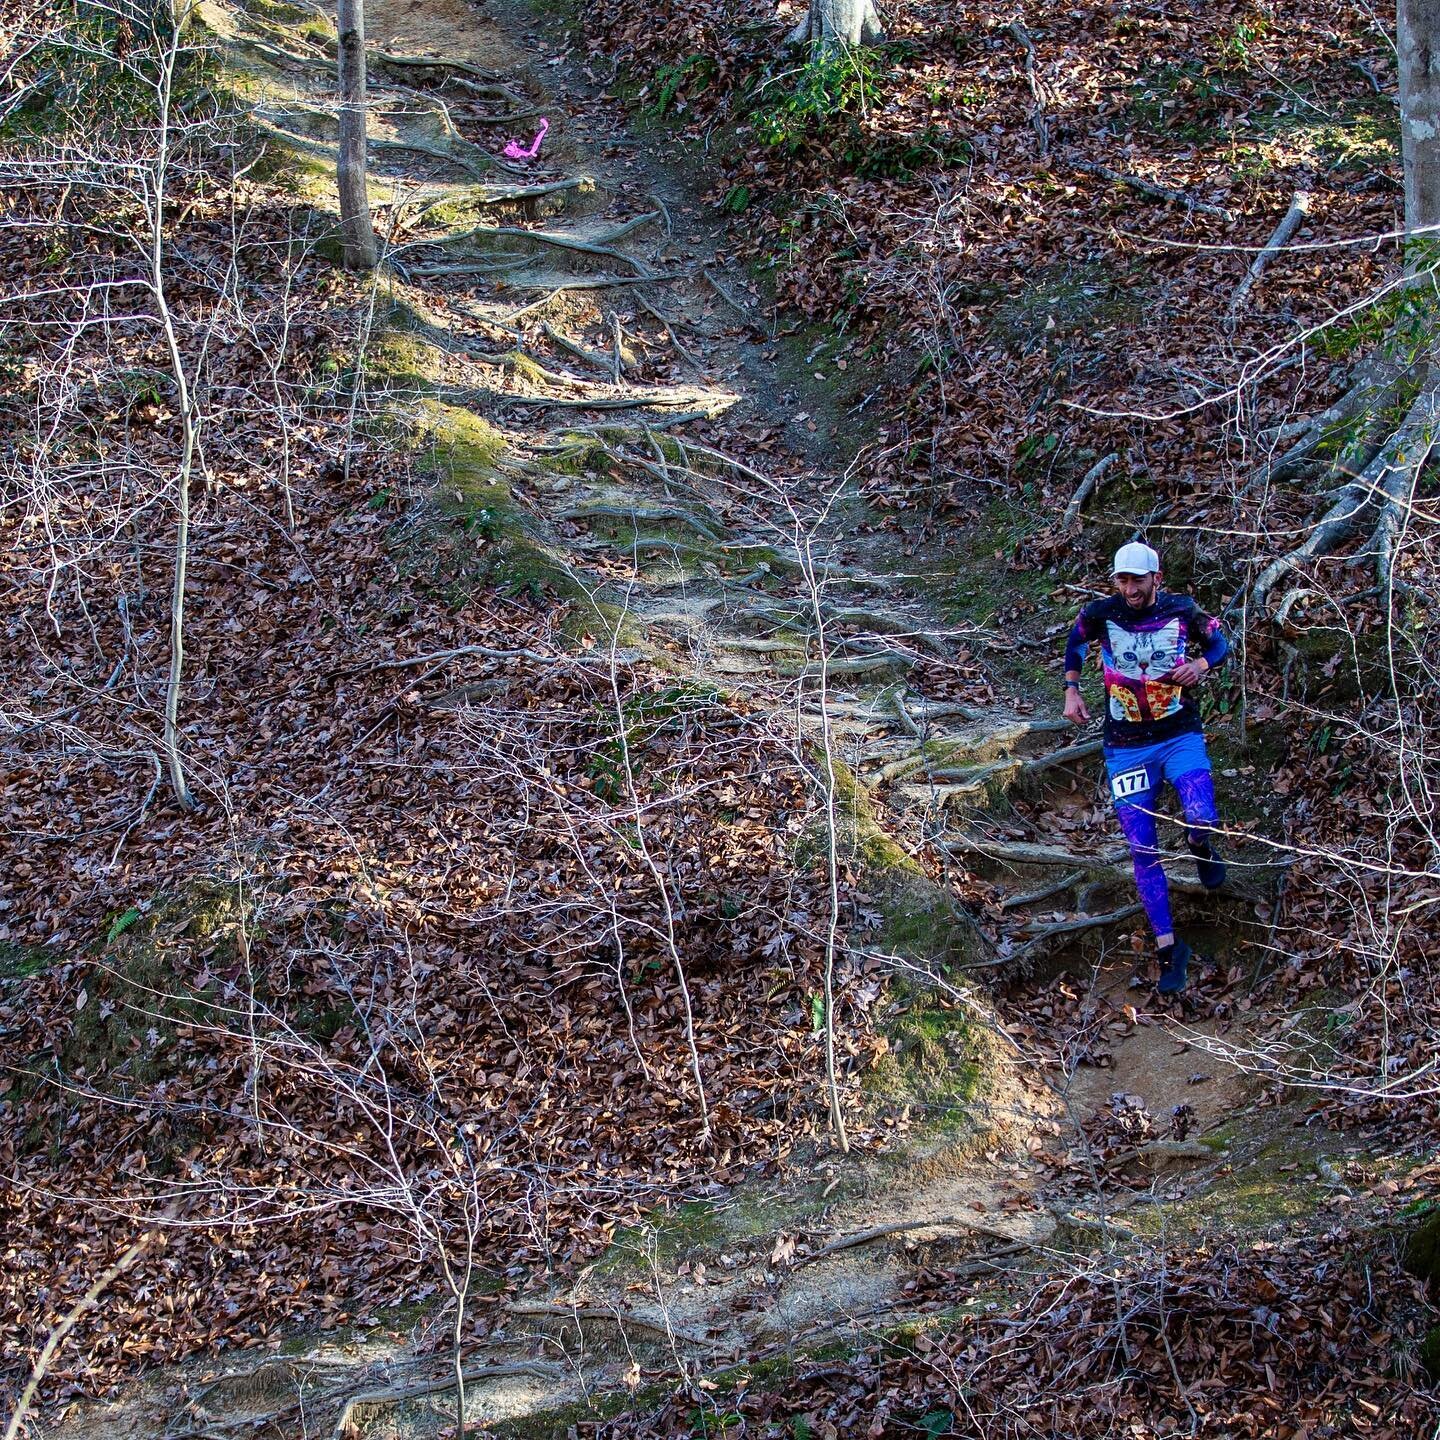 Grateful for trails, for roots and rocks, for hills, and for the opportunity to push myself to the edge. Grateful for the intense efforts that humble and yield perspective.

Grateful for the team at @ex2adventures for a great season-ending event at t